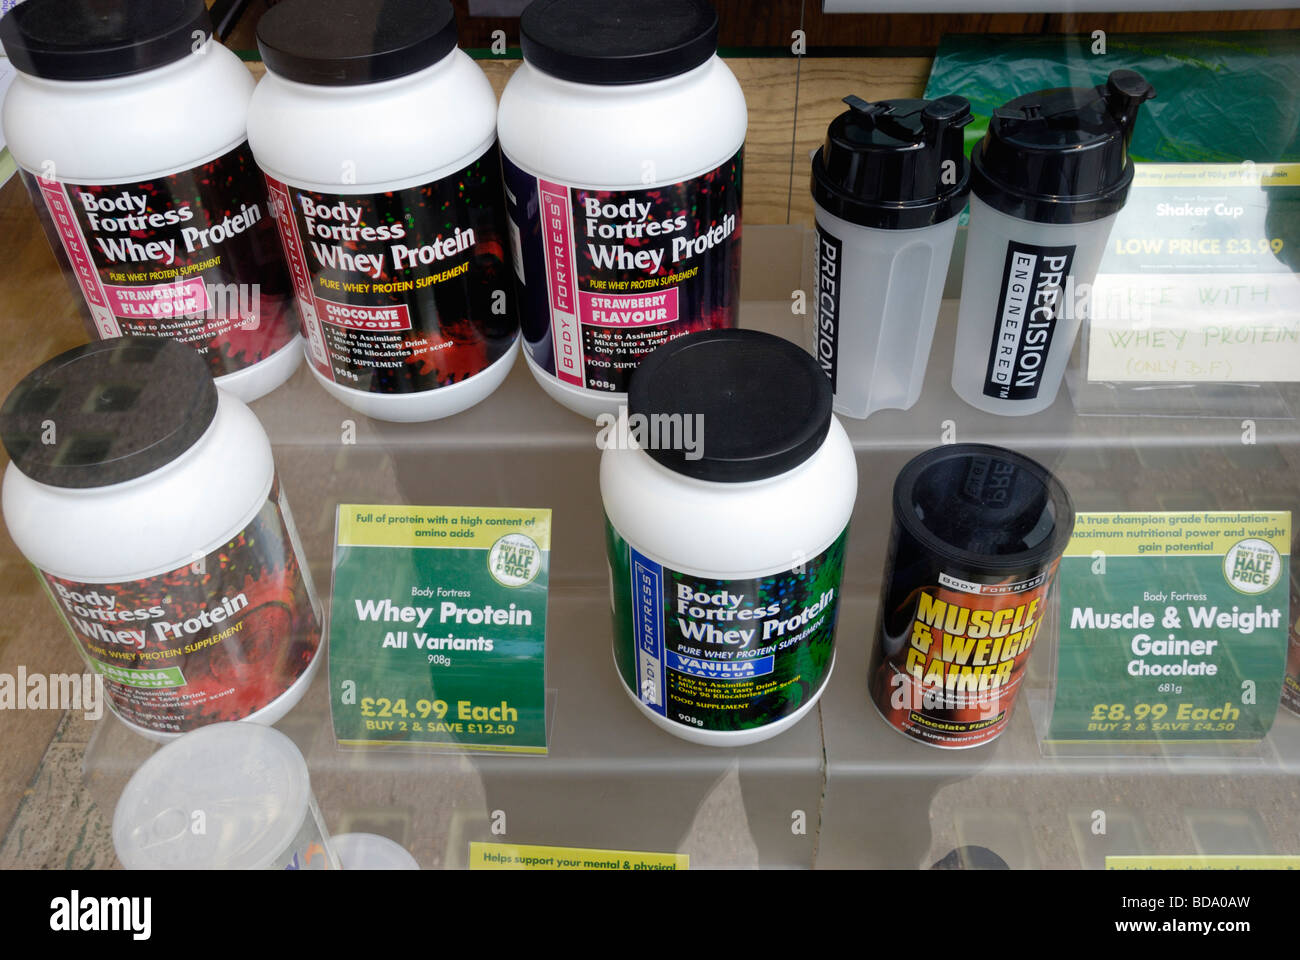 Body building food suppliments in shop window Stock Photo